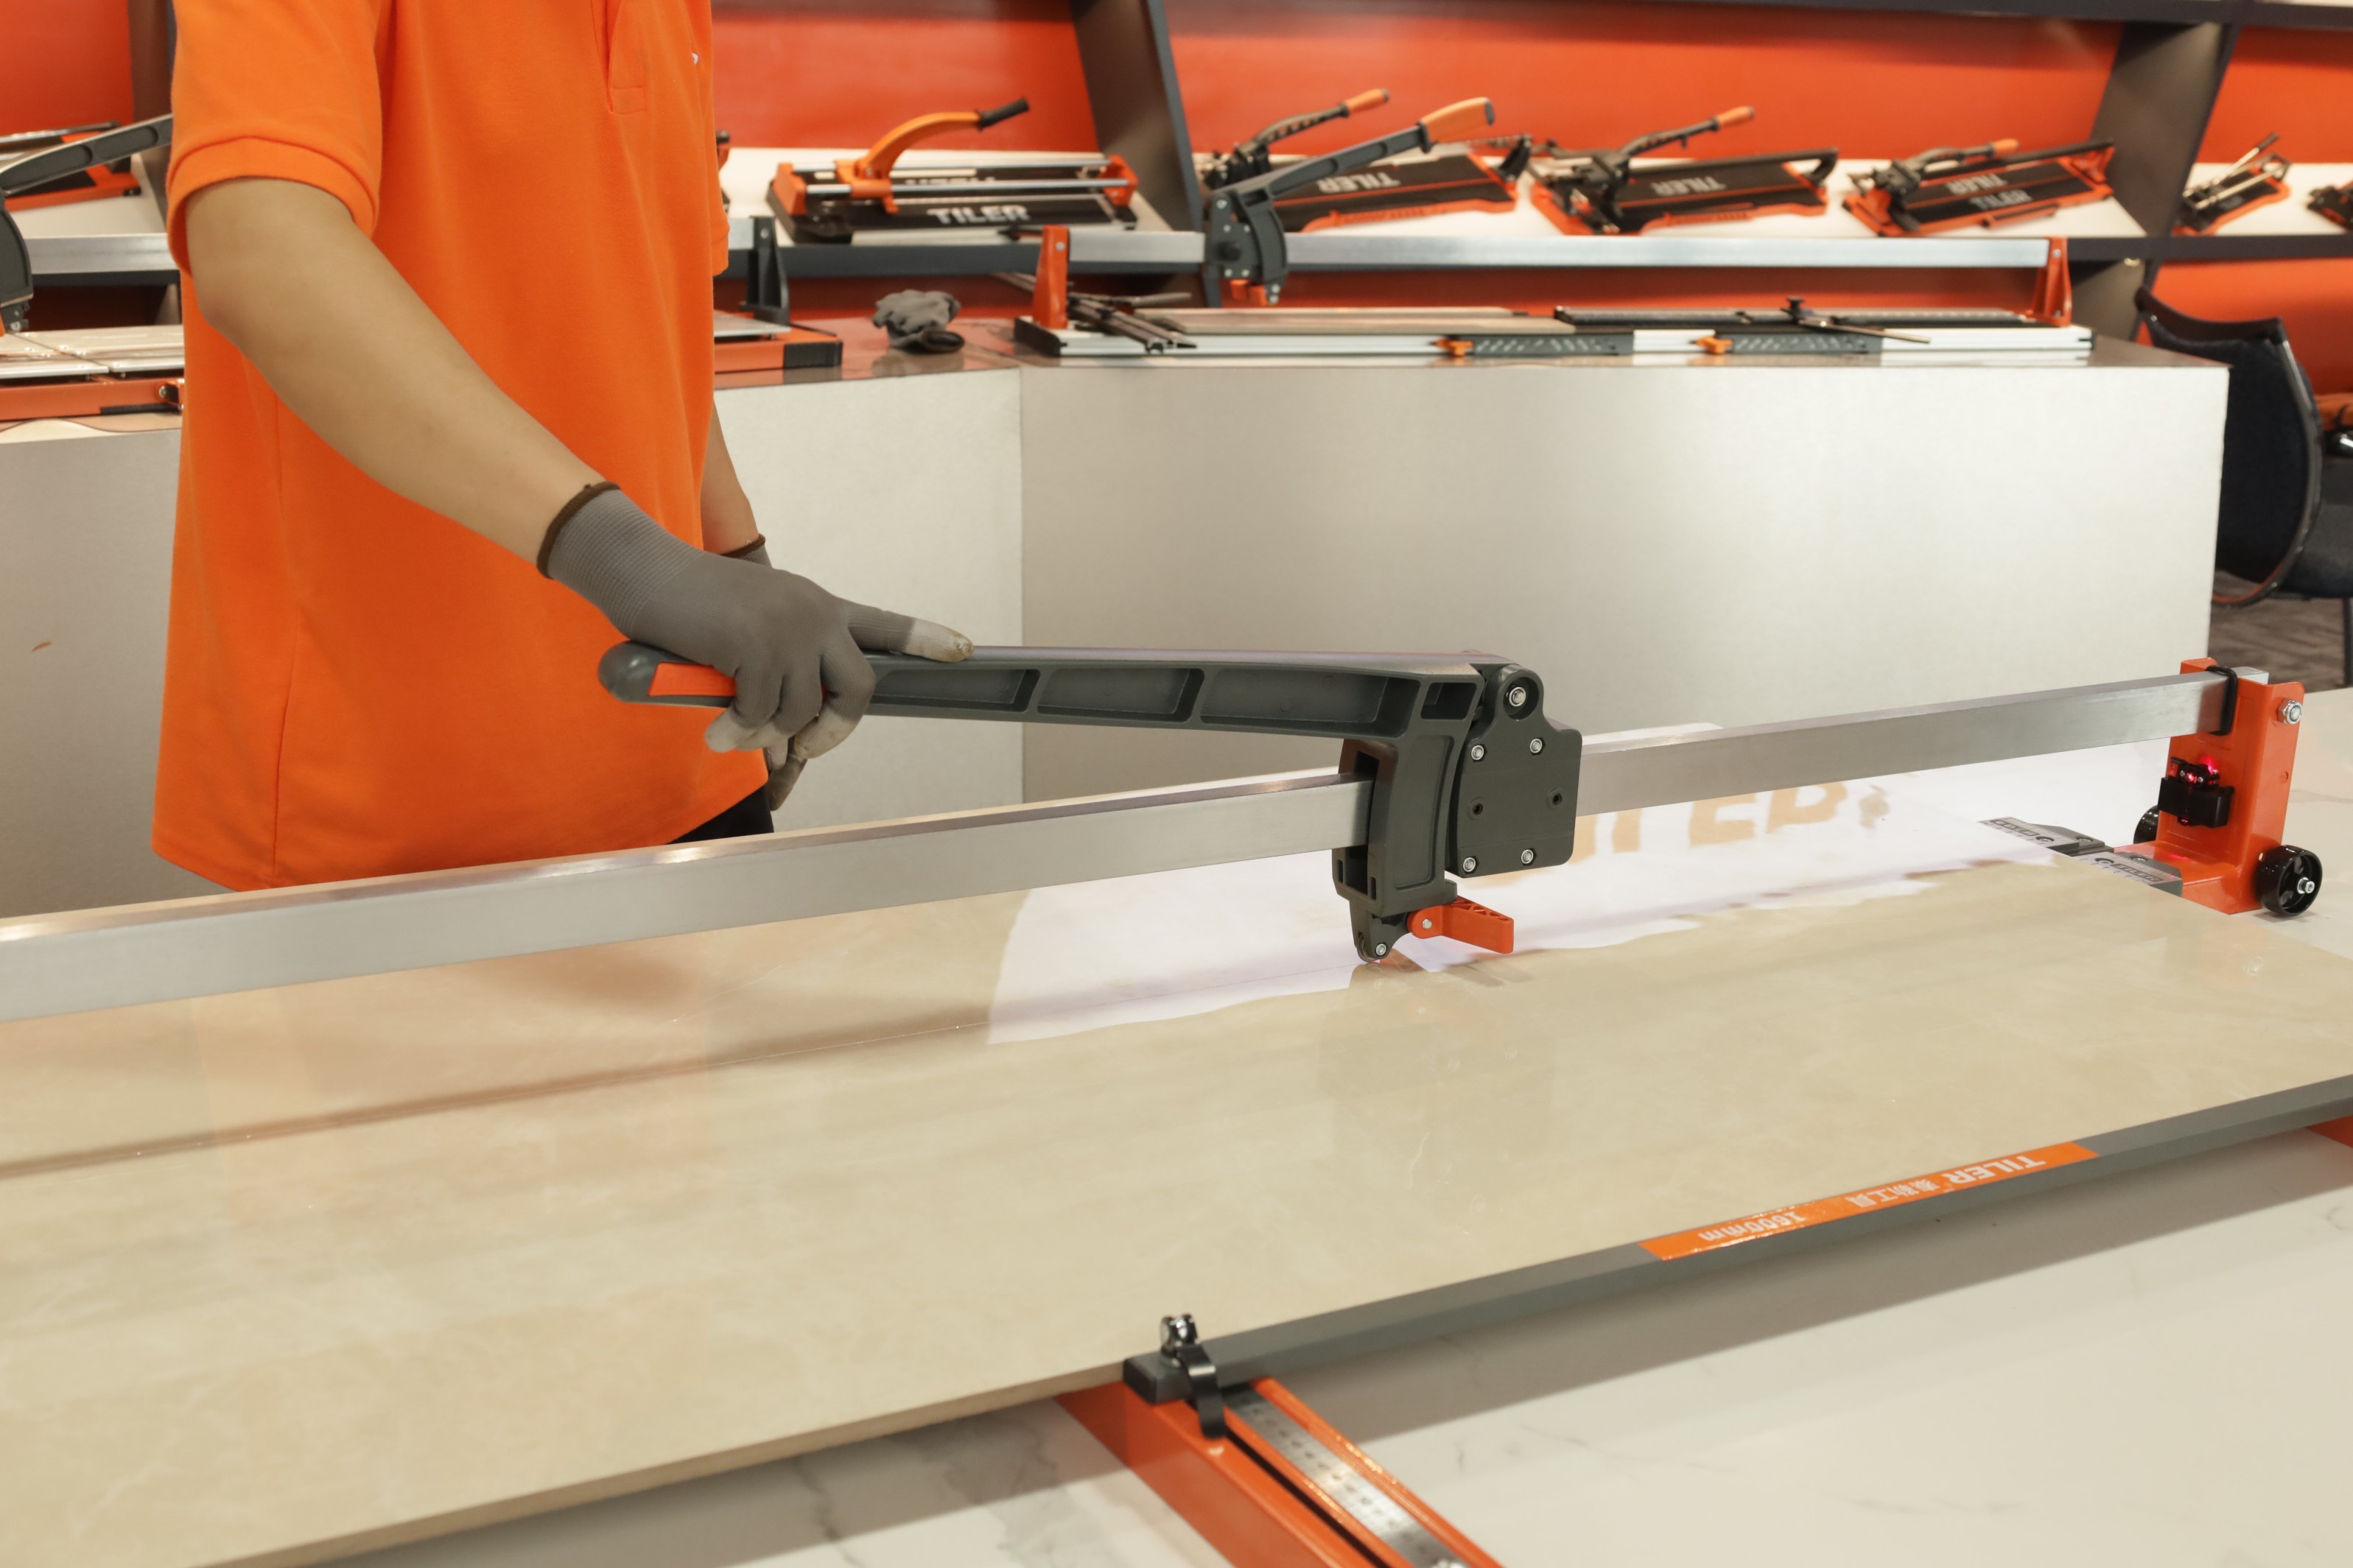 Increase Productivity with Tile Cutter Accessories